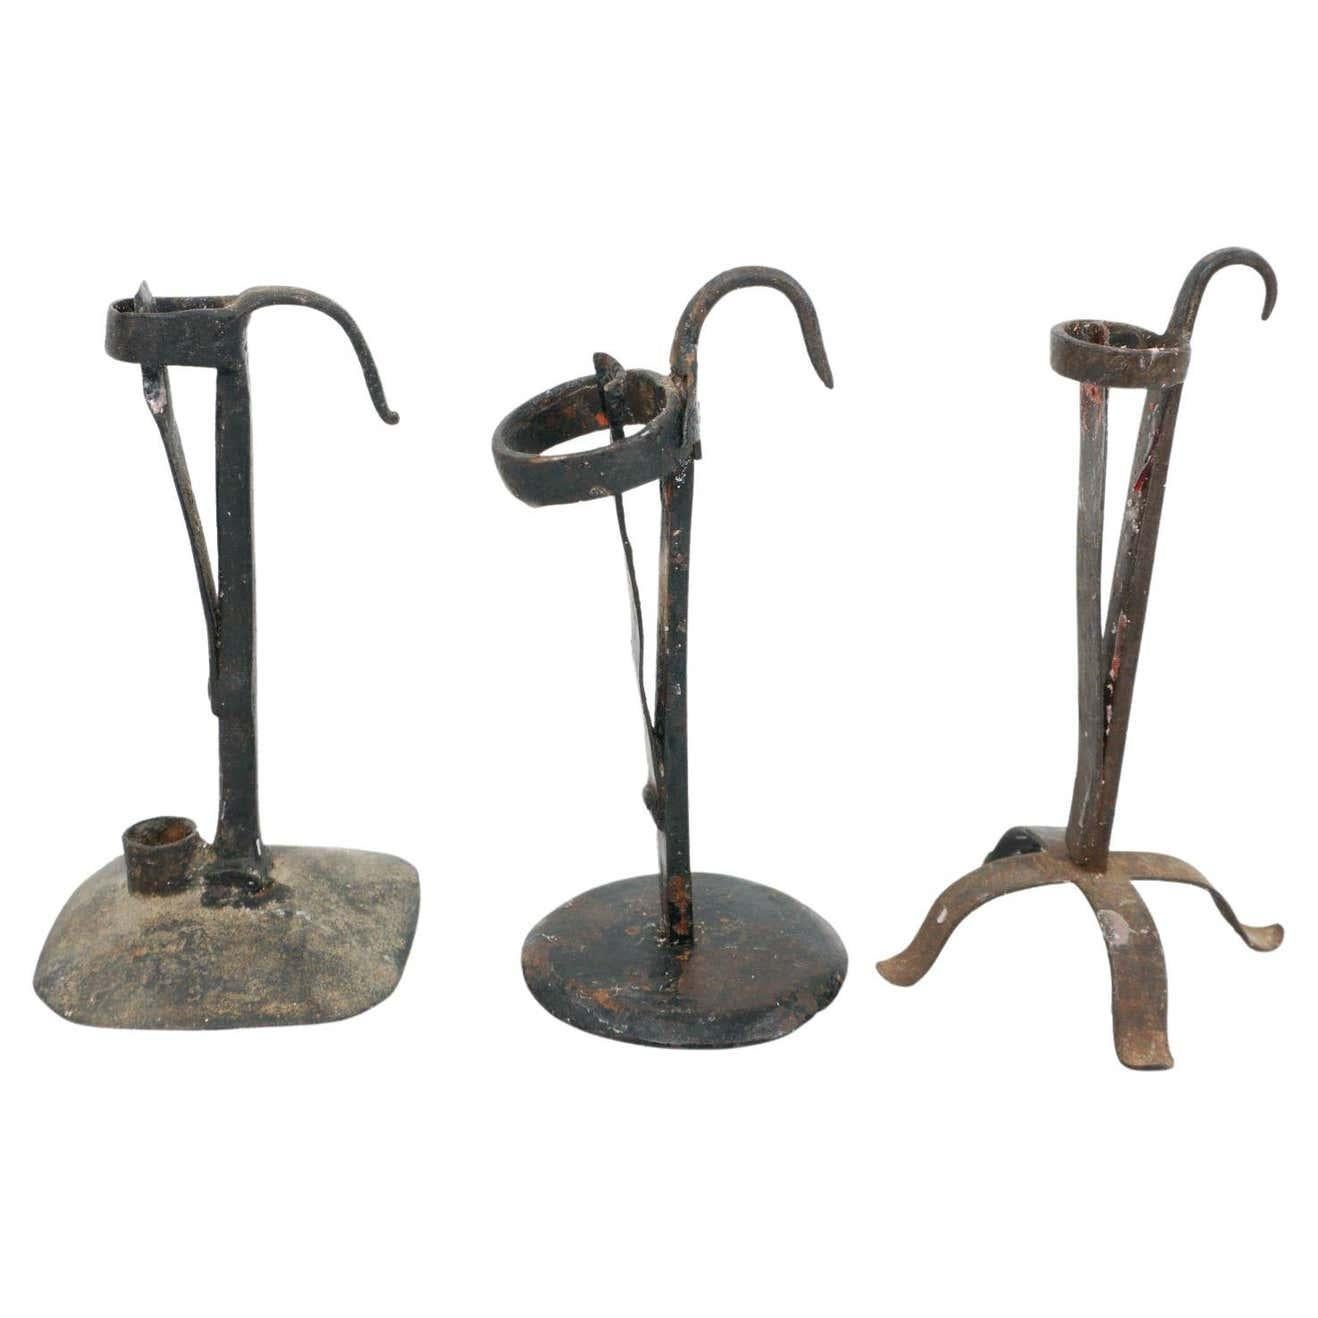 Set of Three Rustic Metal Candle Holders, circa 1930 For Sale 1